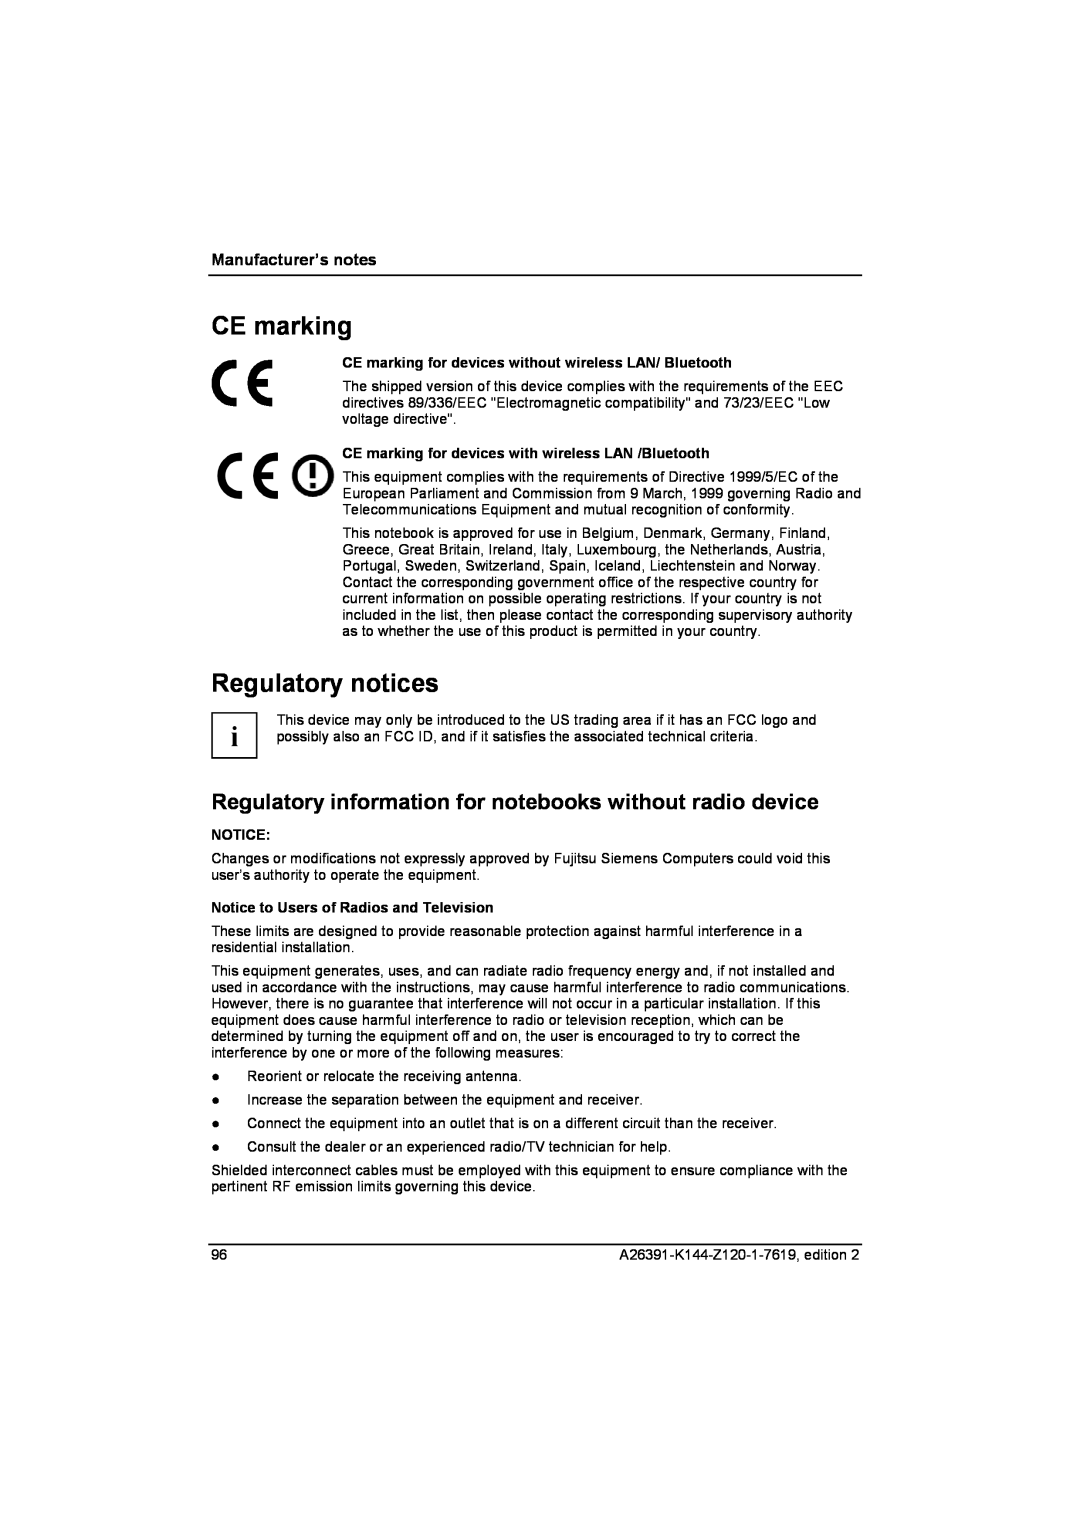 Fujitsu S SERIES manual CE marking, Regulatory notices, Regulatory information for notebooks without radio device 